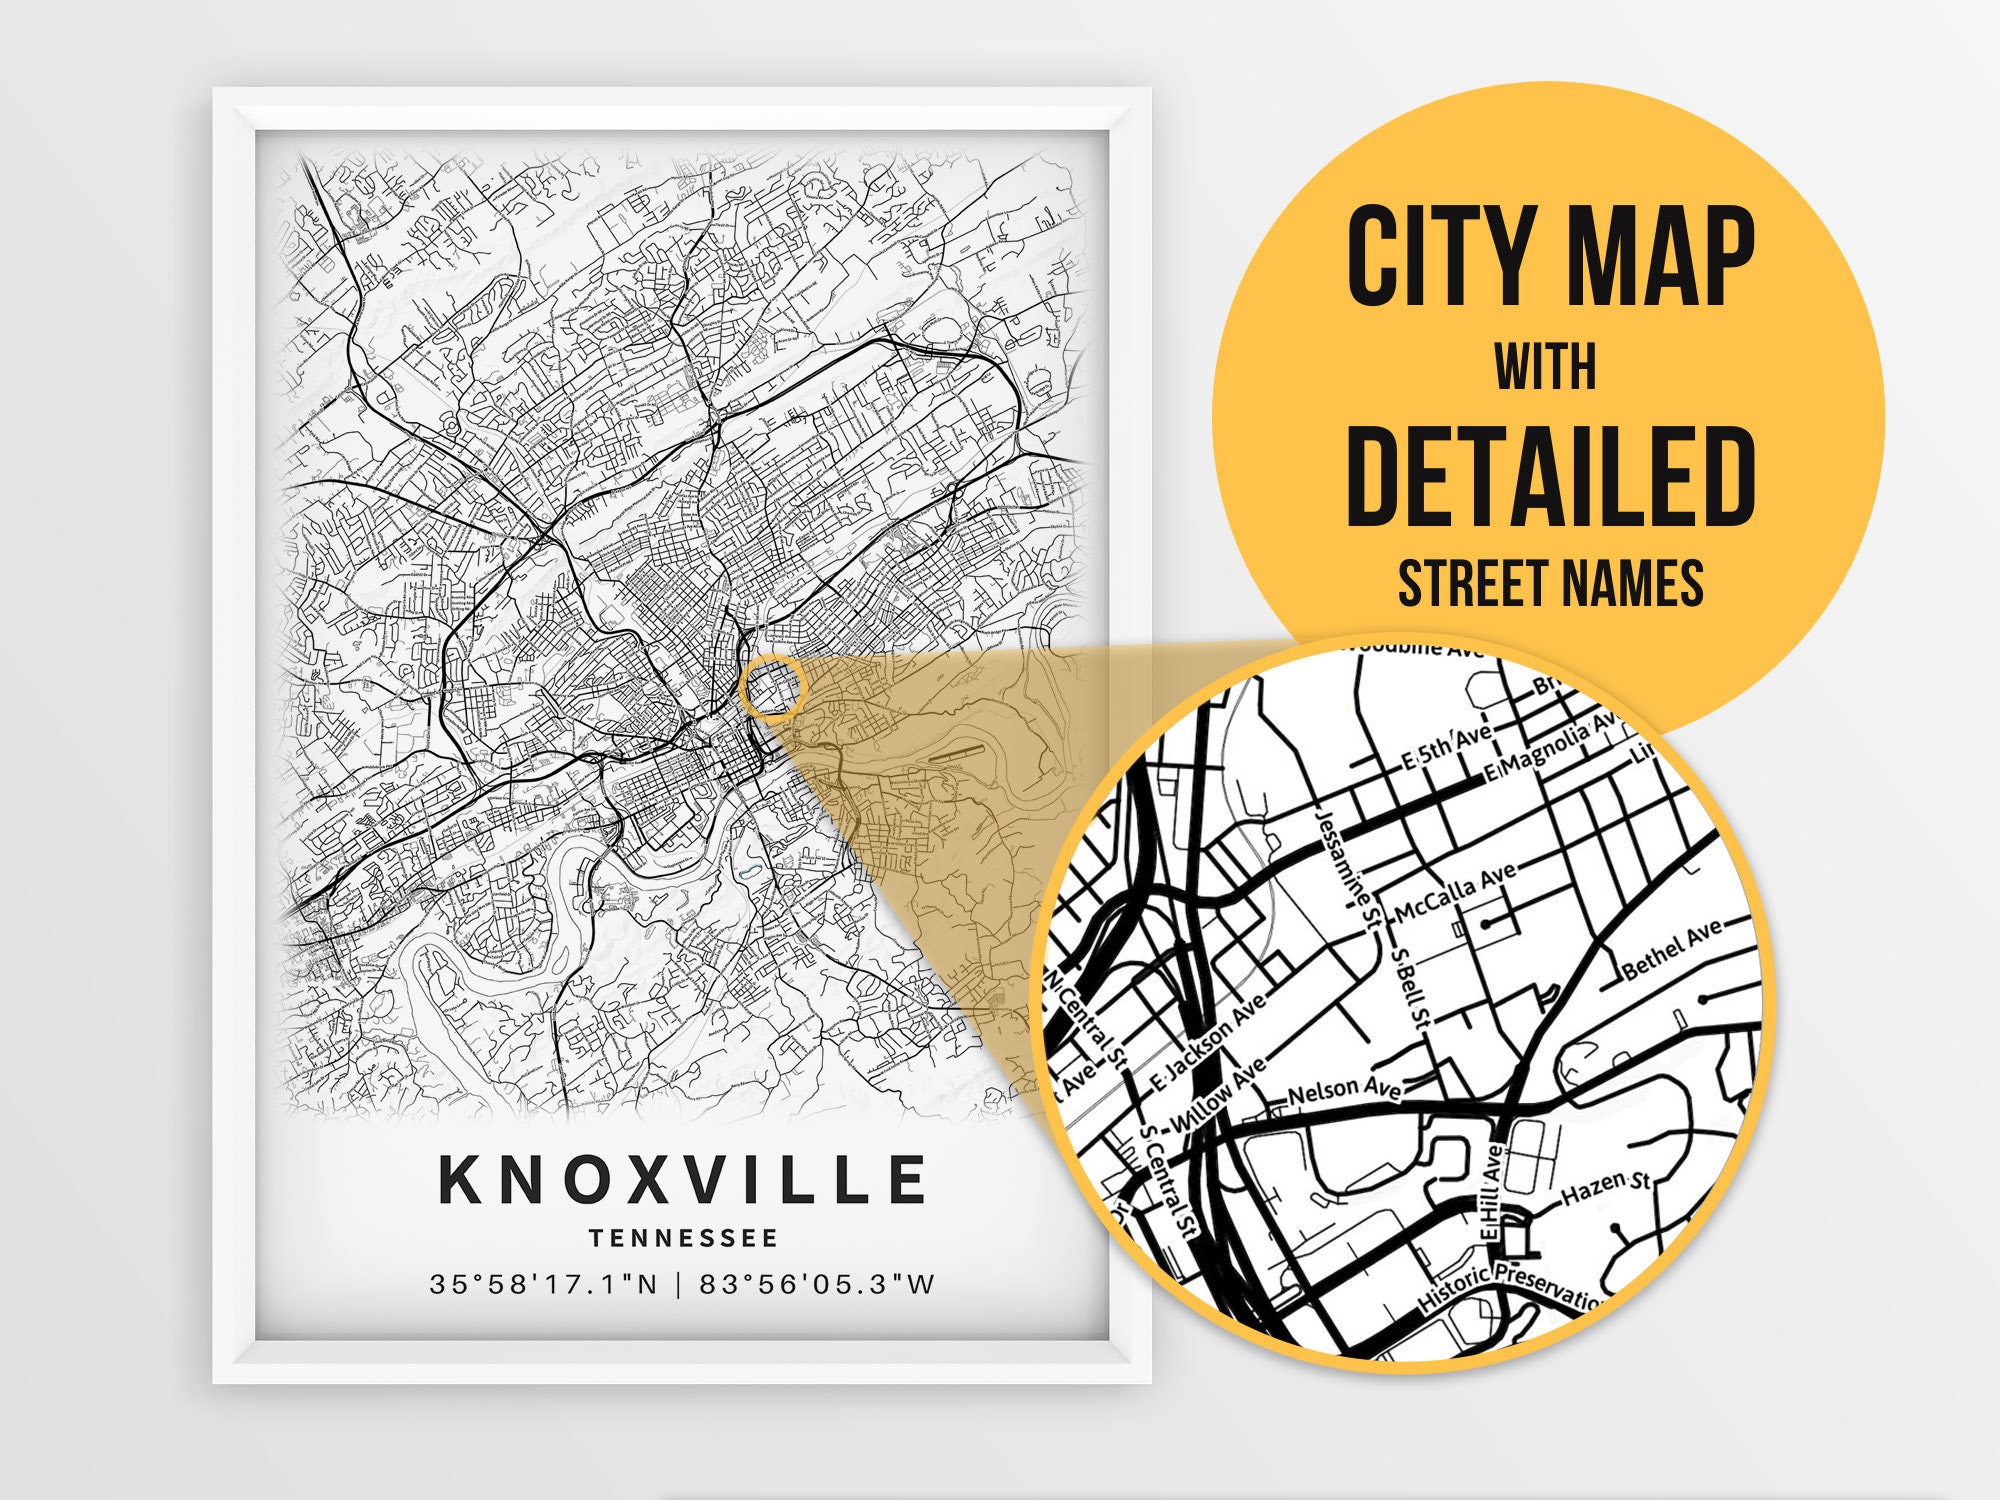 printable-map-of-knoxville-tn-tennessee-united-states-with-etsy